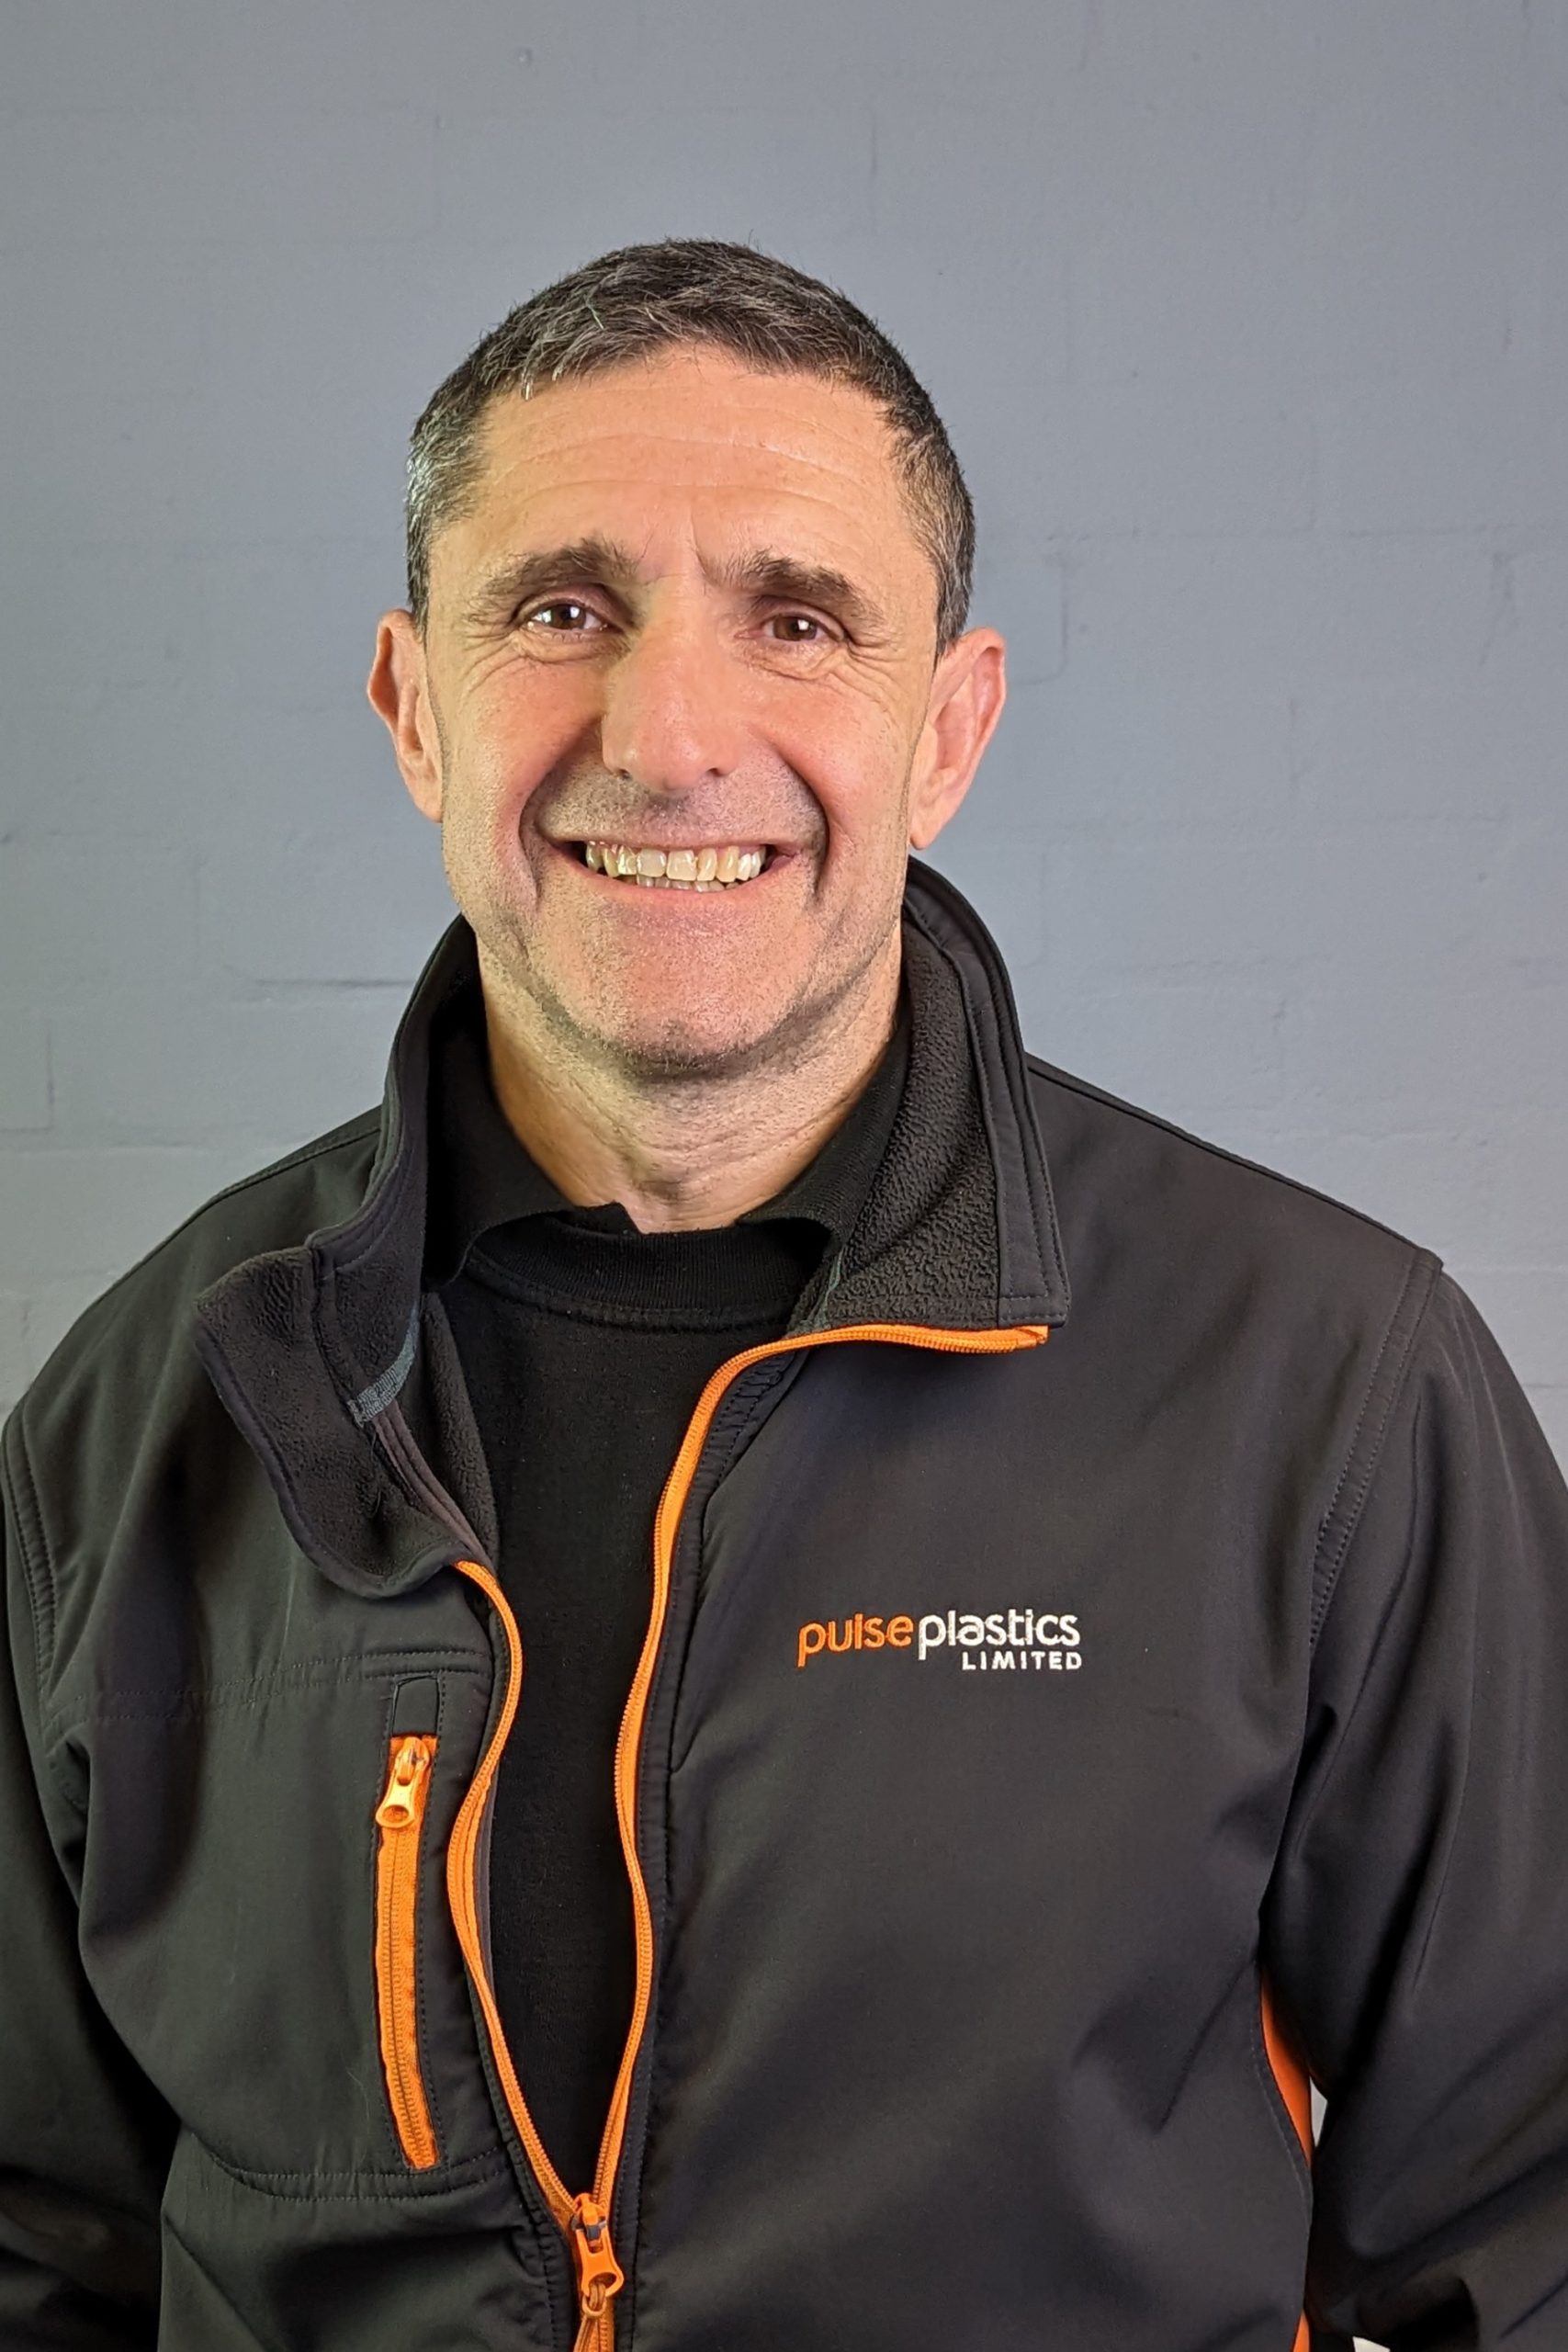 A Pulse Plastics employee in a black and orange jacket smiling.